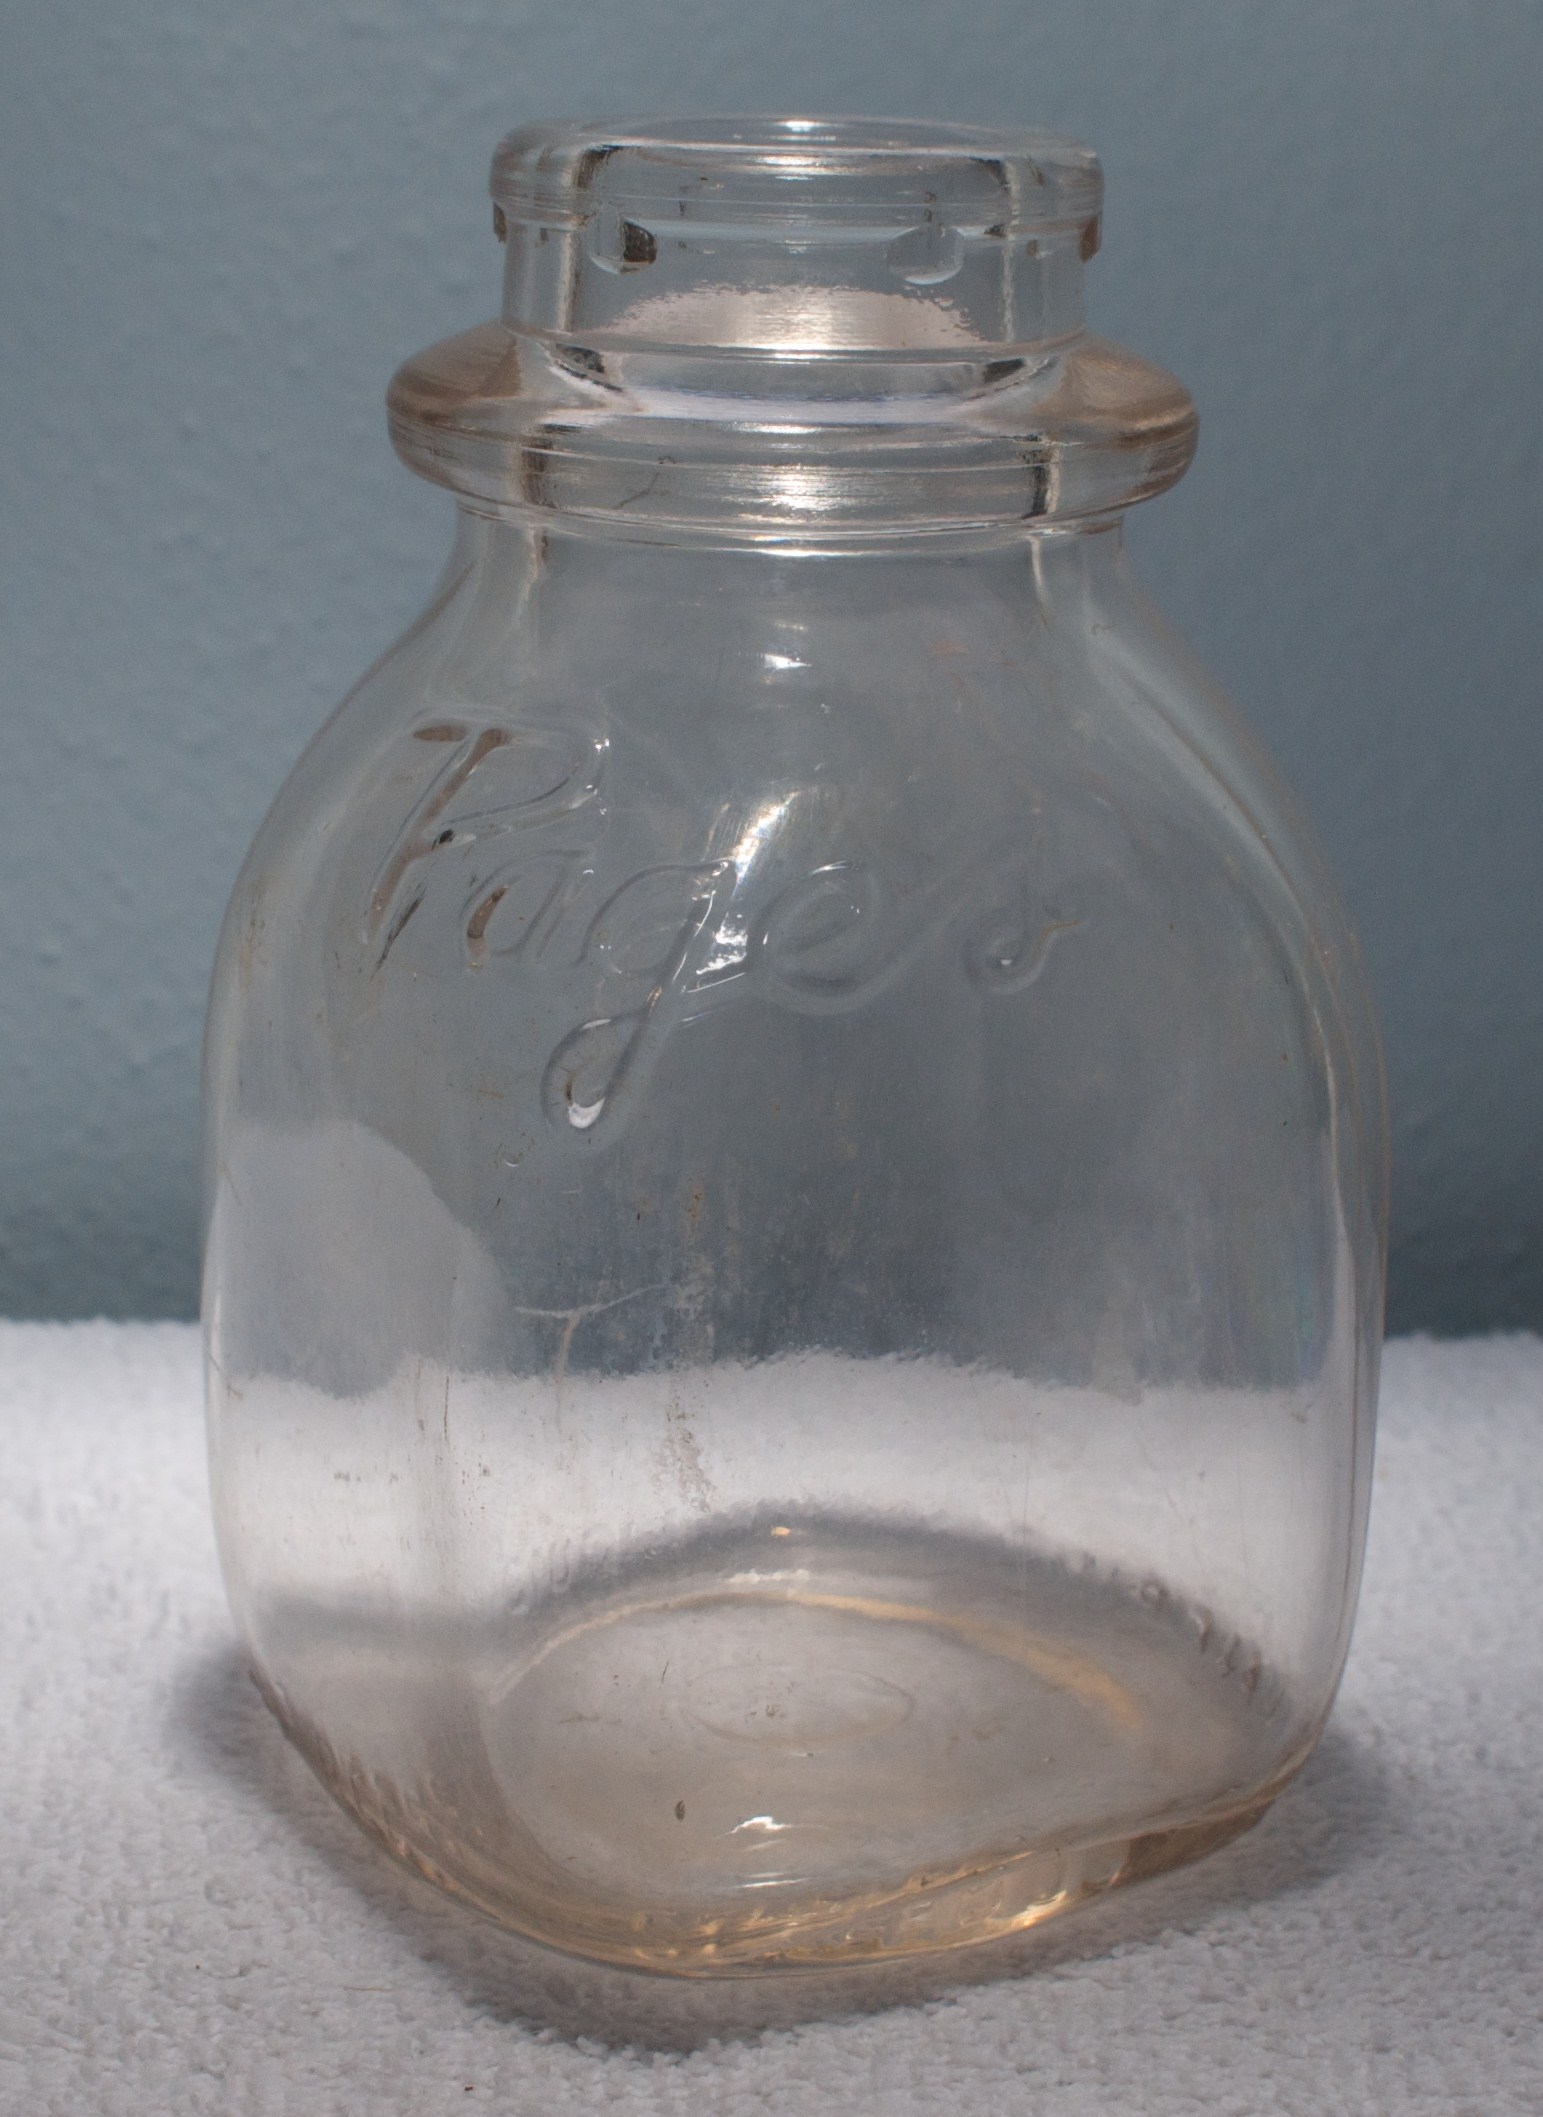 Pages Half-Pint Milk Bottle Not Identified as Toledo Ohio Page Dairy